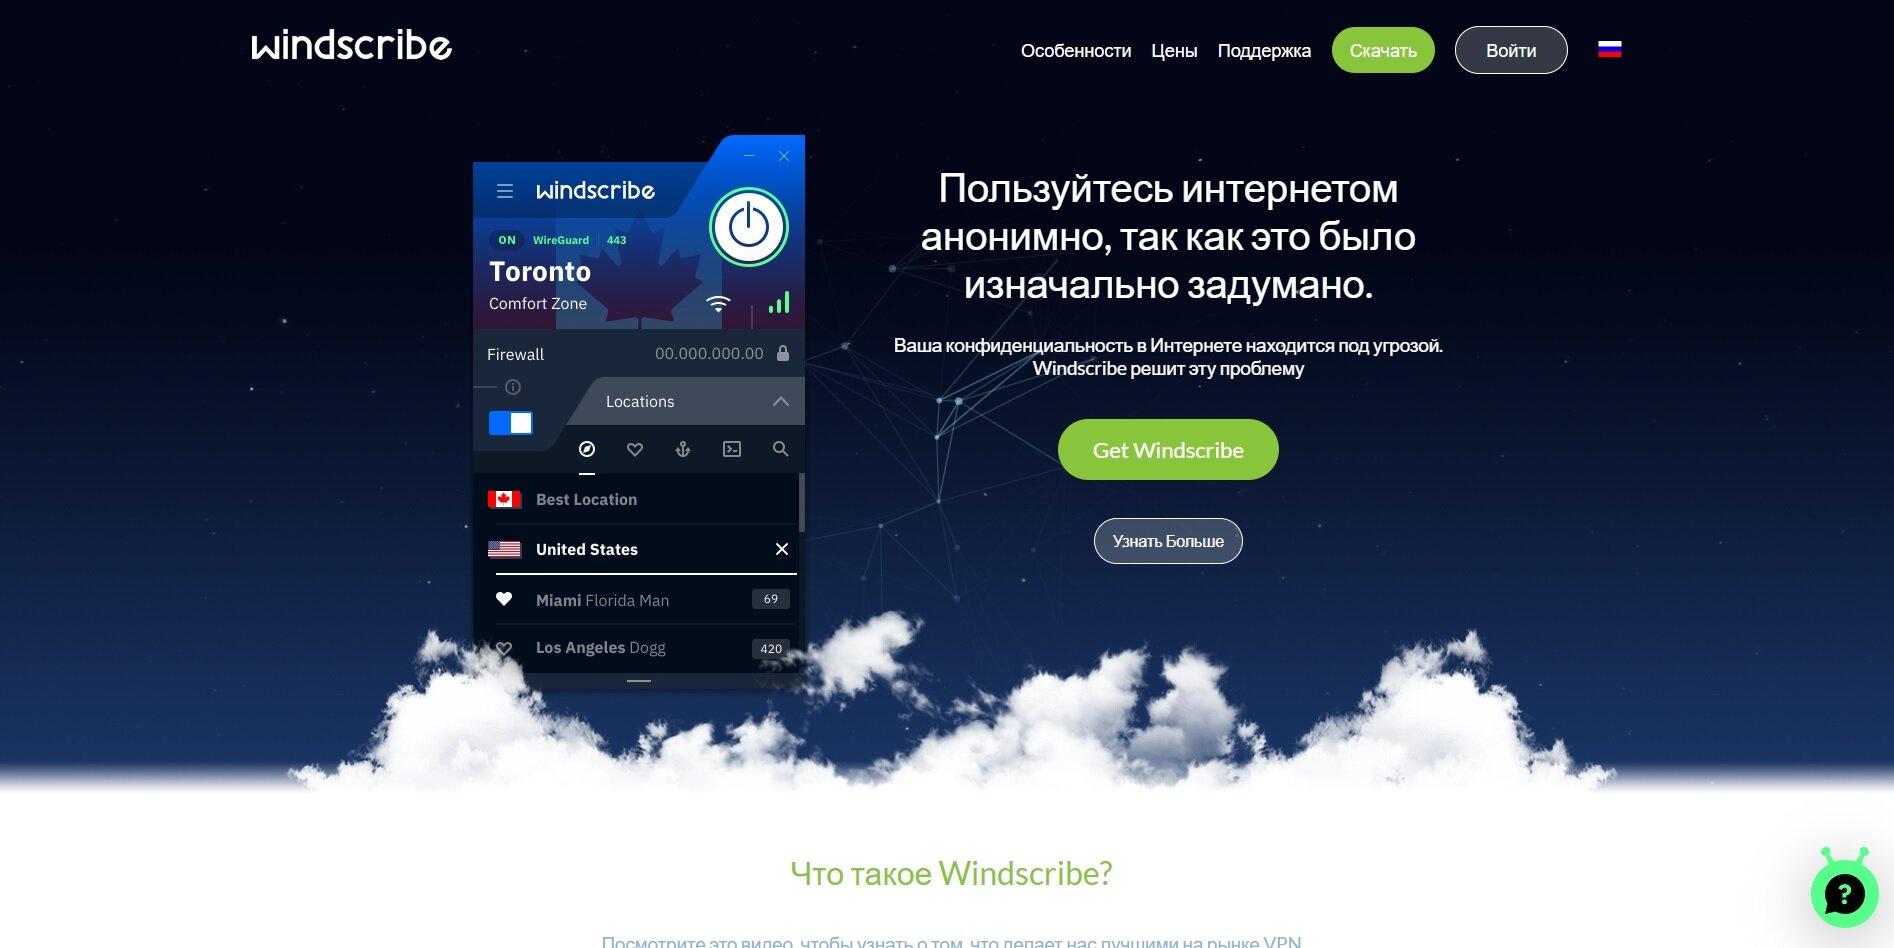 Windscribe.com – Review and opinions on the VPN Service